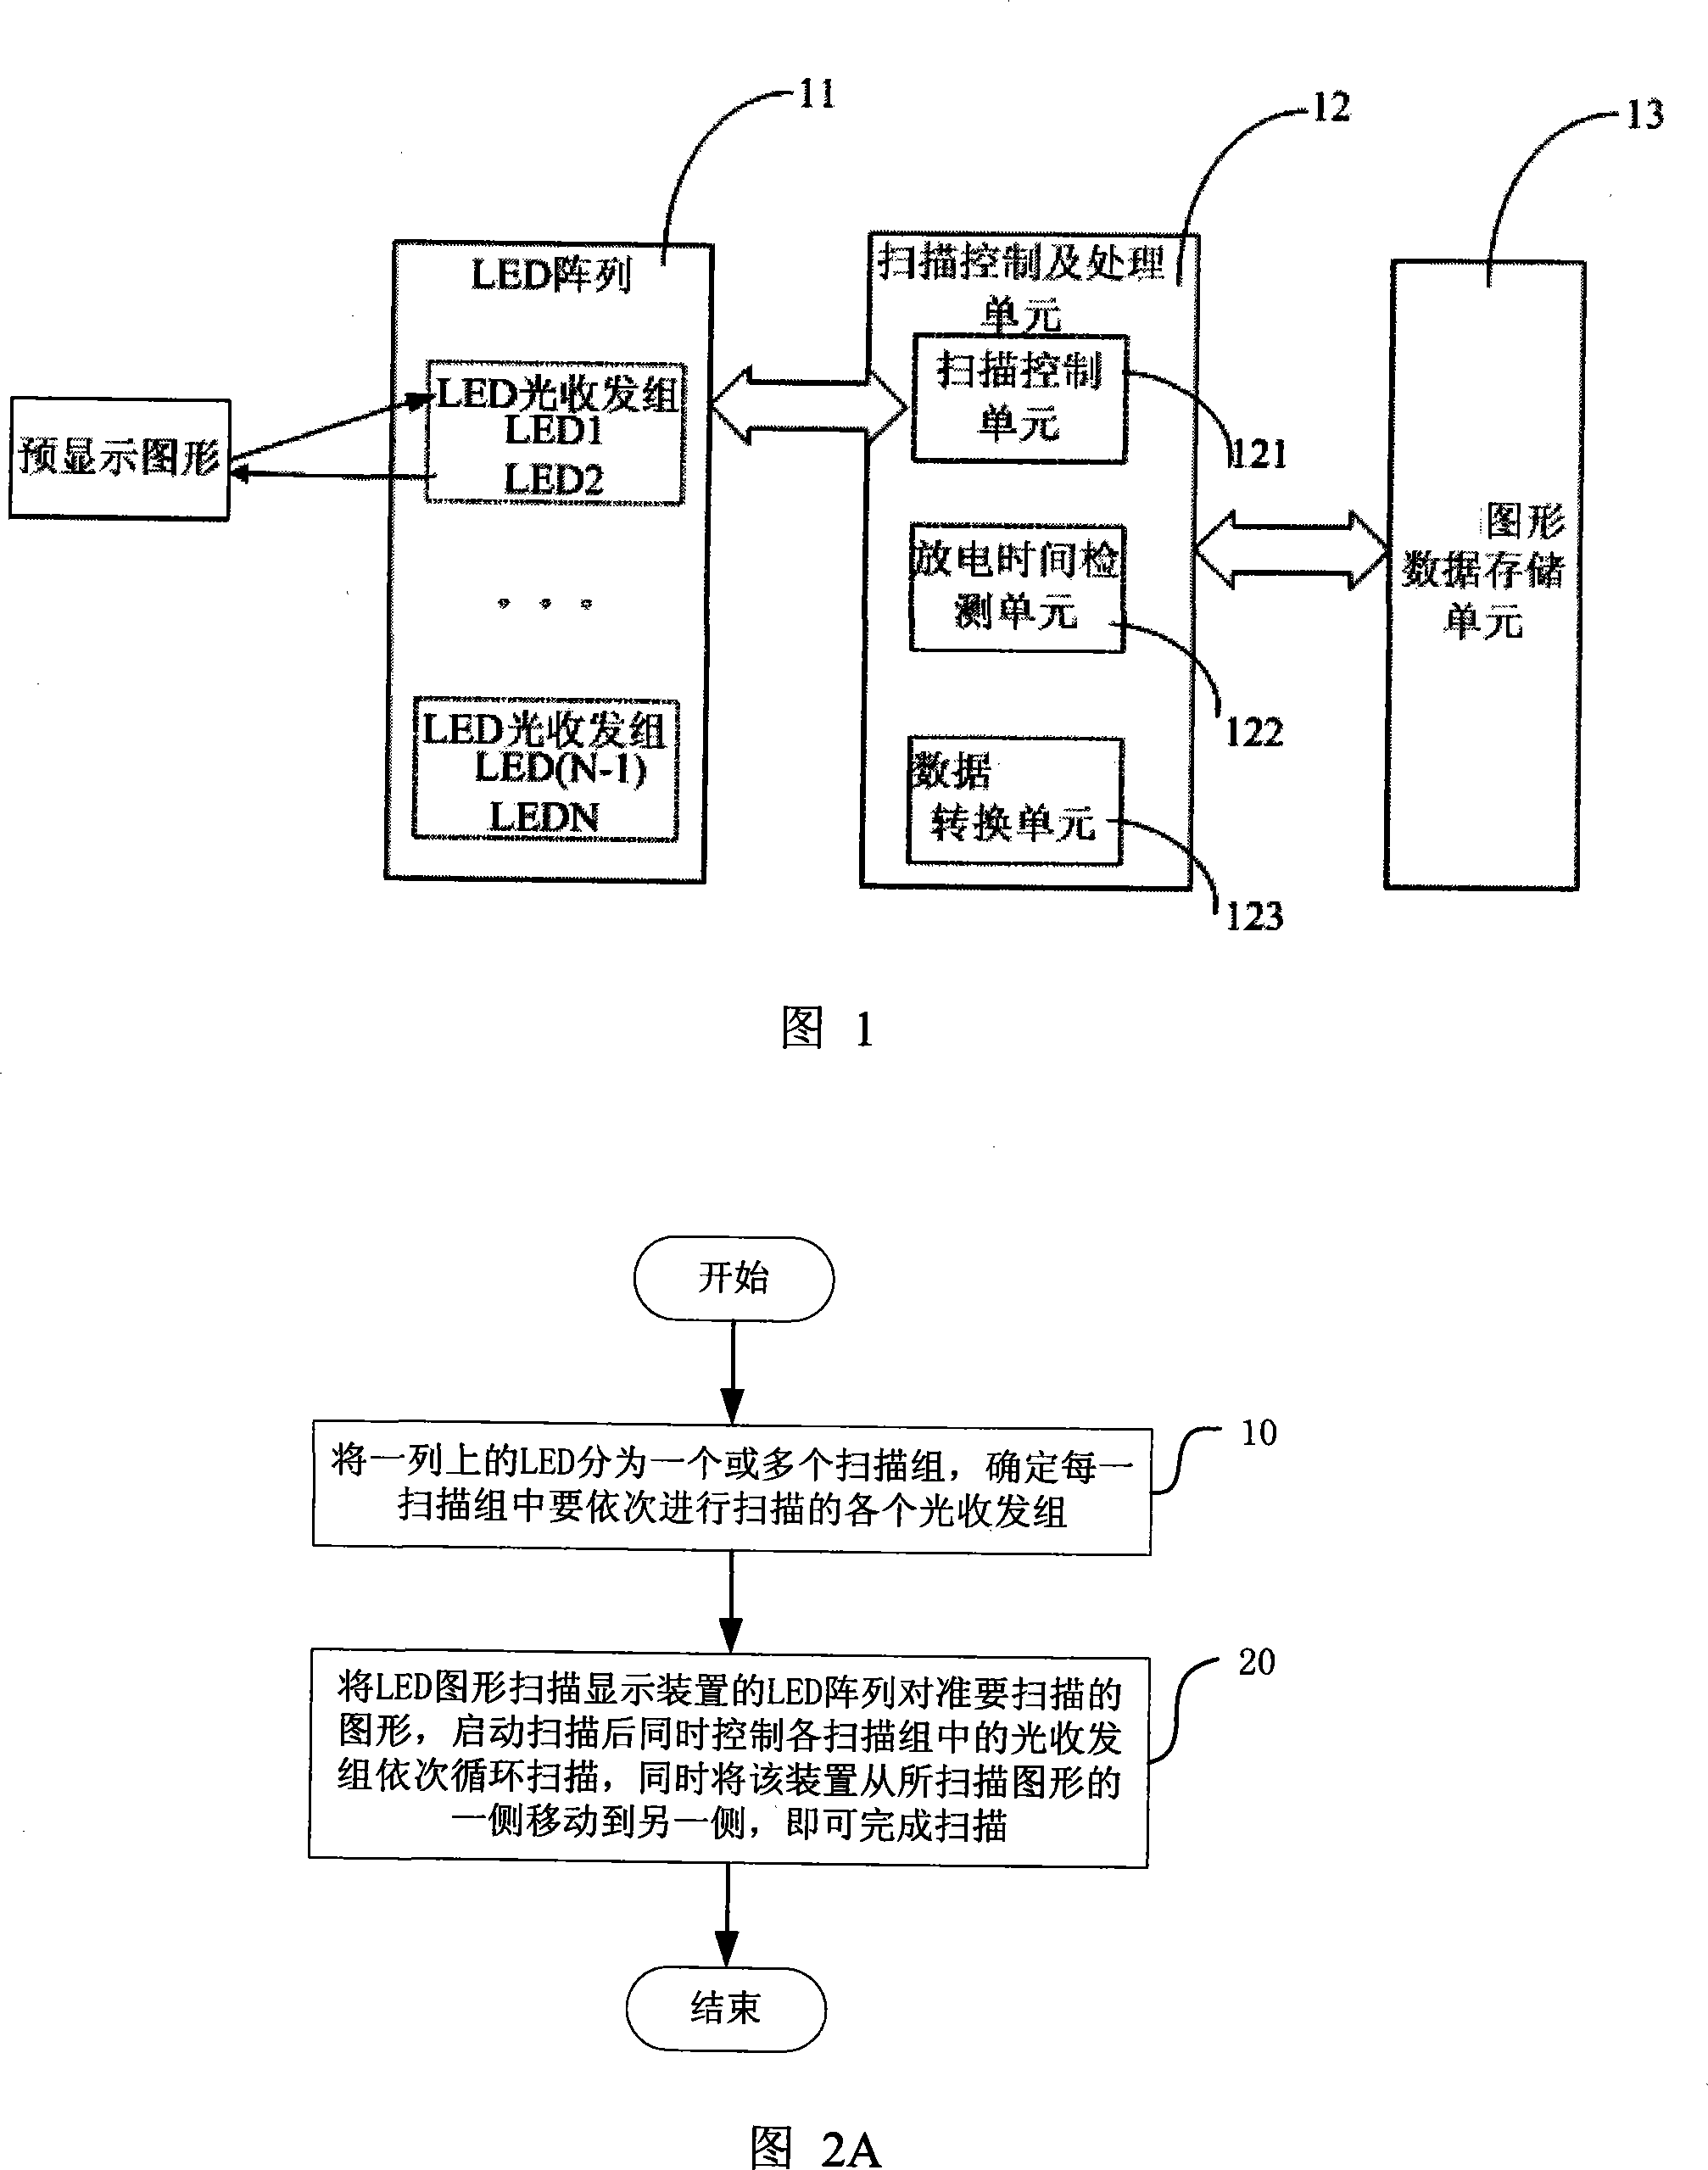 A device and scanning method based on LED array scanning pattern